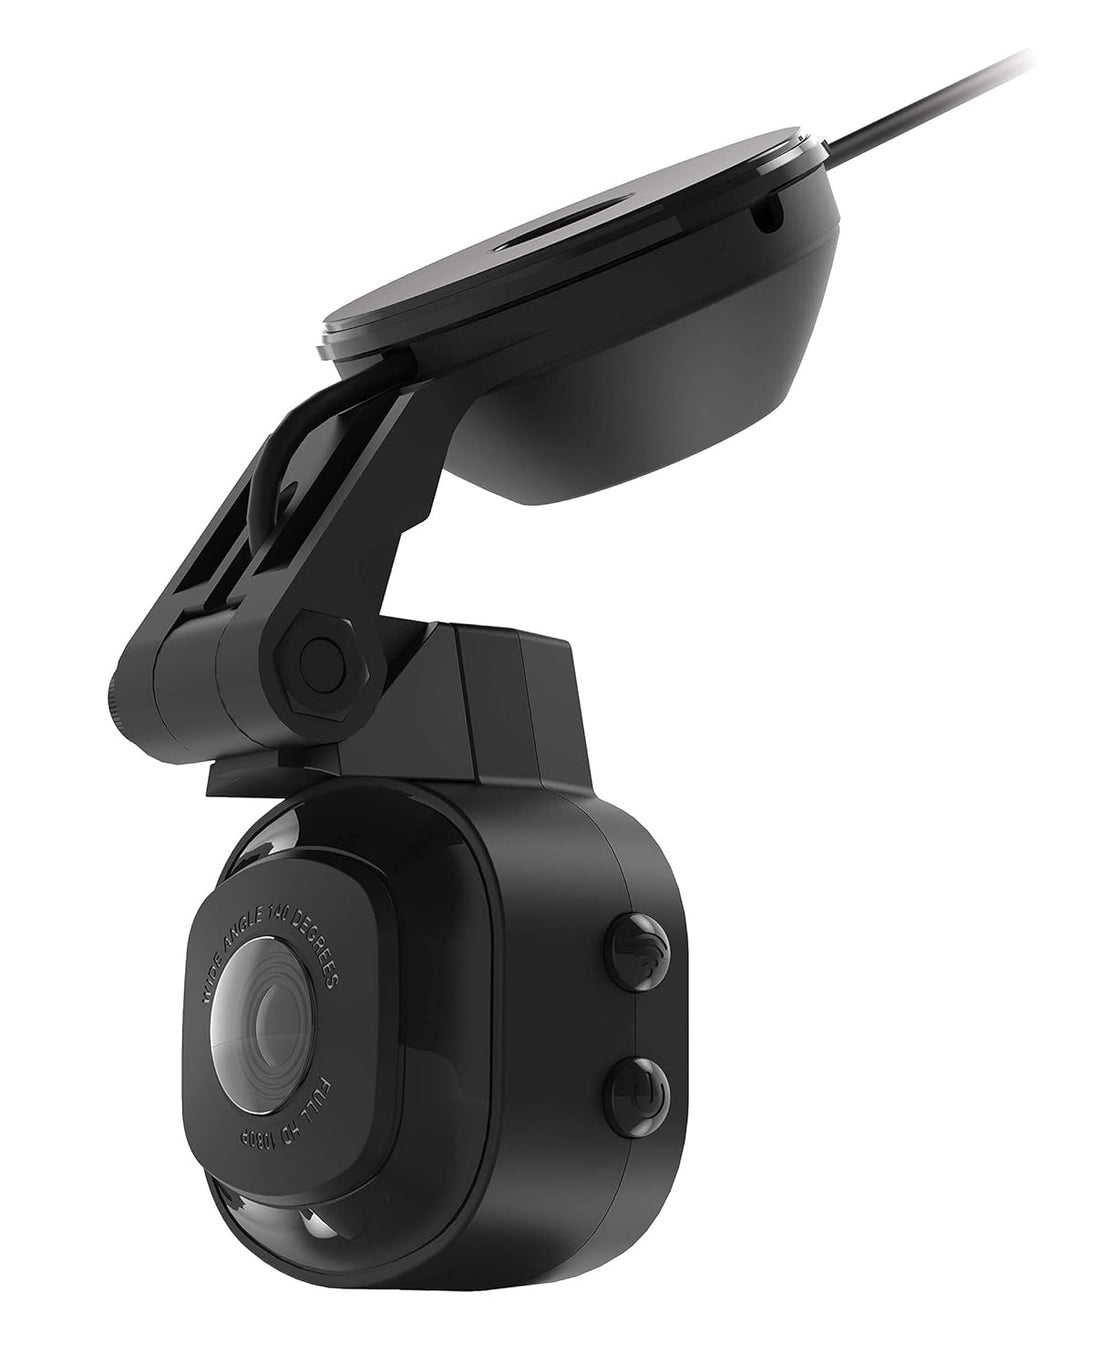 SCOSCHE NEXC11016 Full HD Smart Dash Cam Powered by Nexar with Suction Cup Mount & 16GB Micro-SD Card - Black